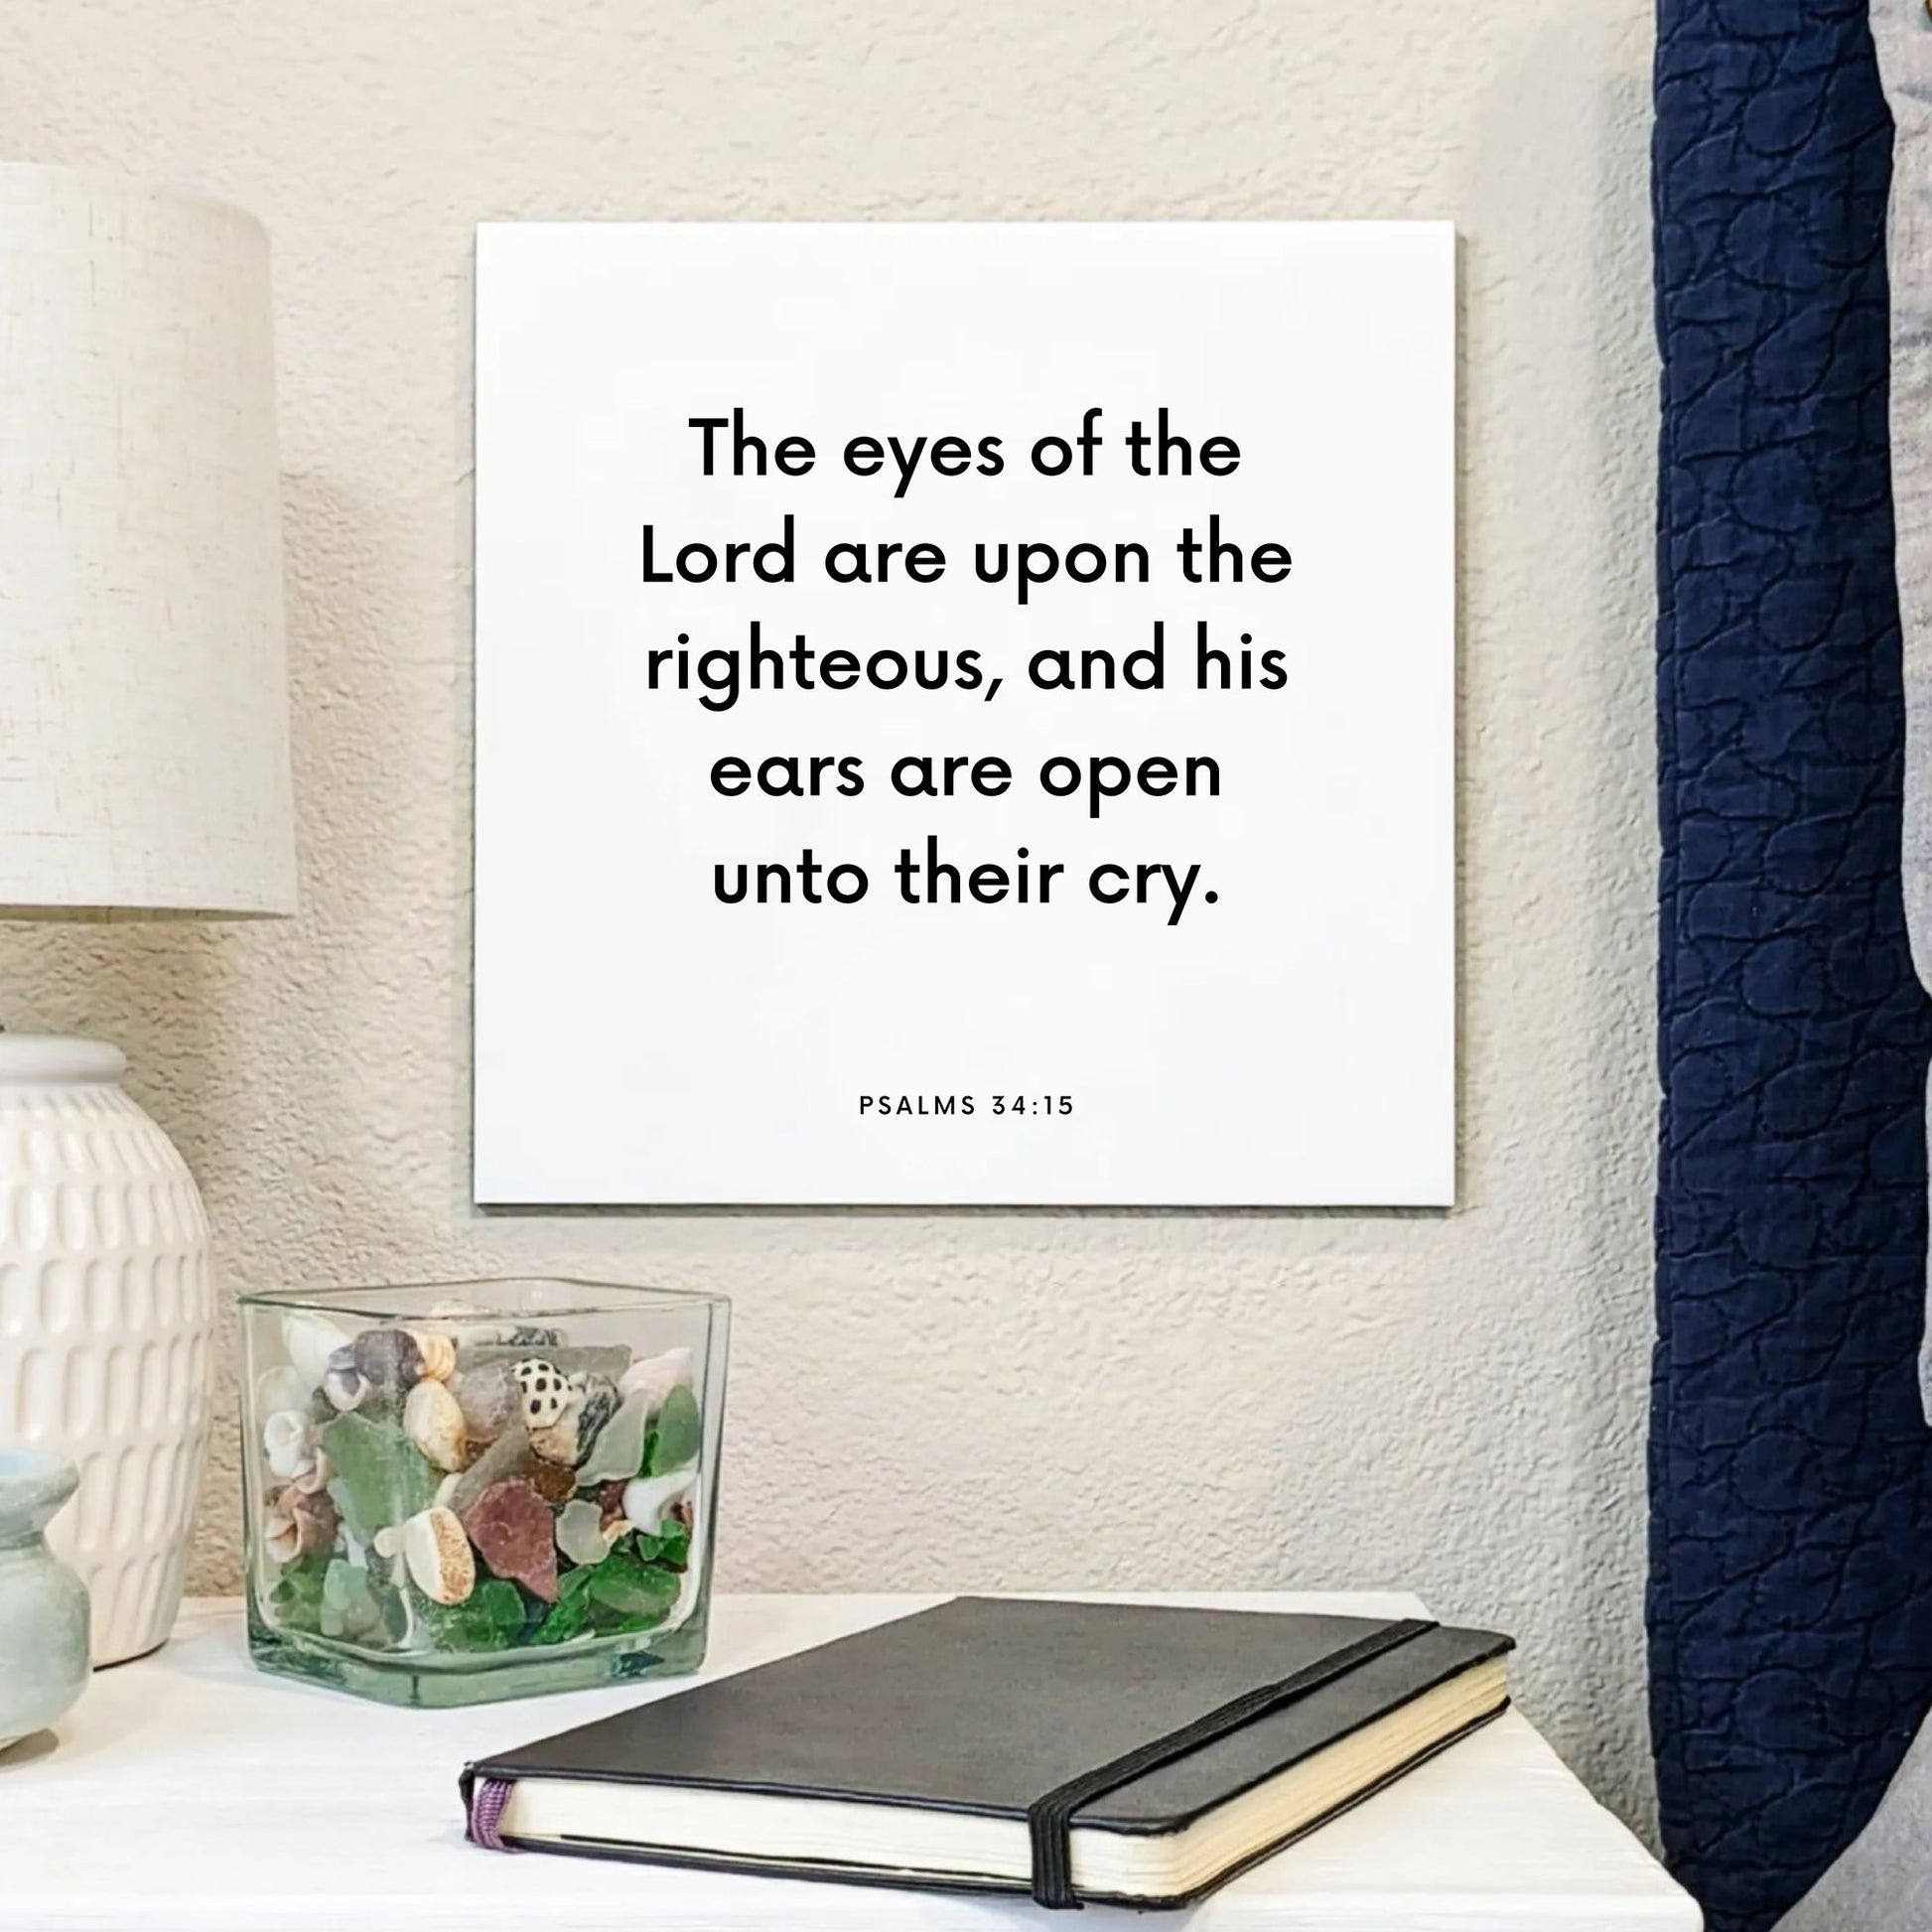 Bedside mouting of the scripture tile for Psalms 34:15 - "The eyes of the Lord are upon the righteous"